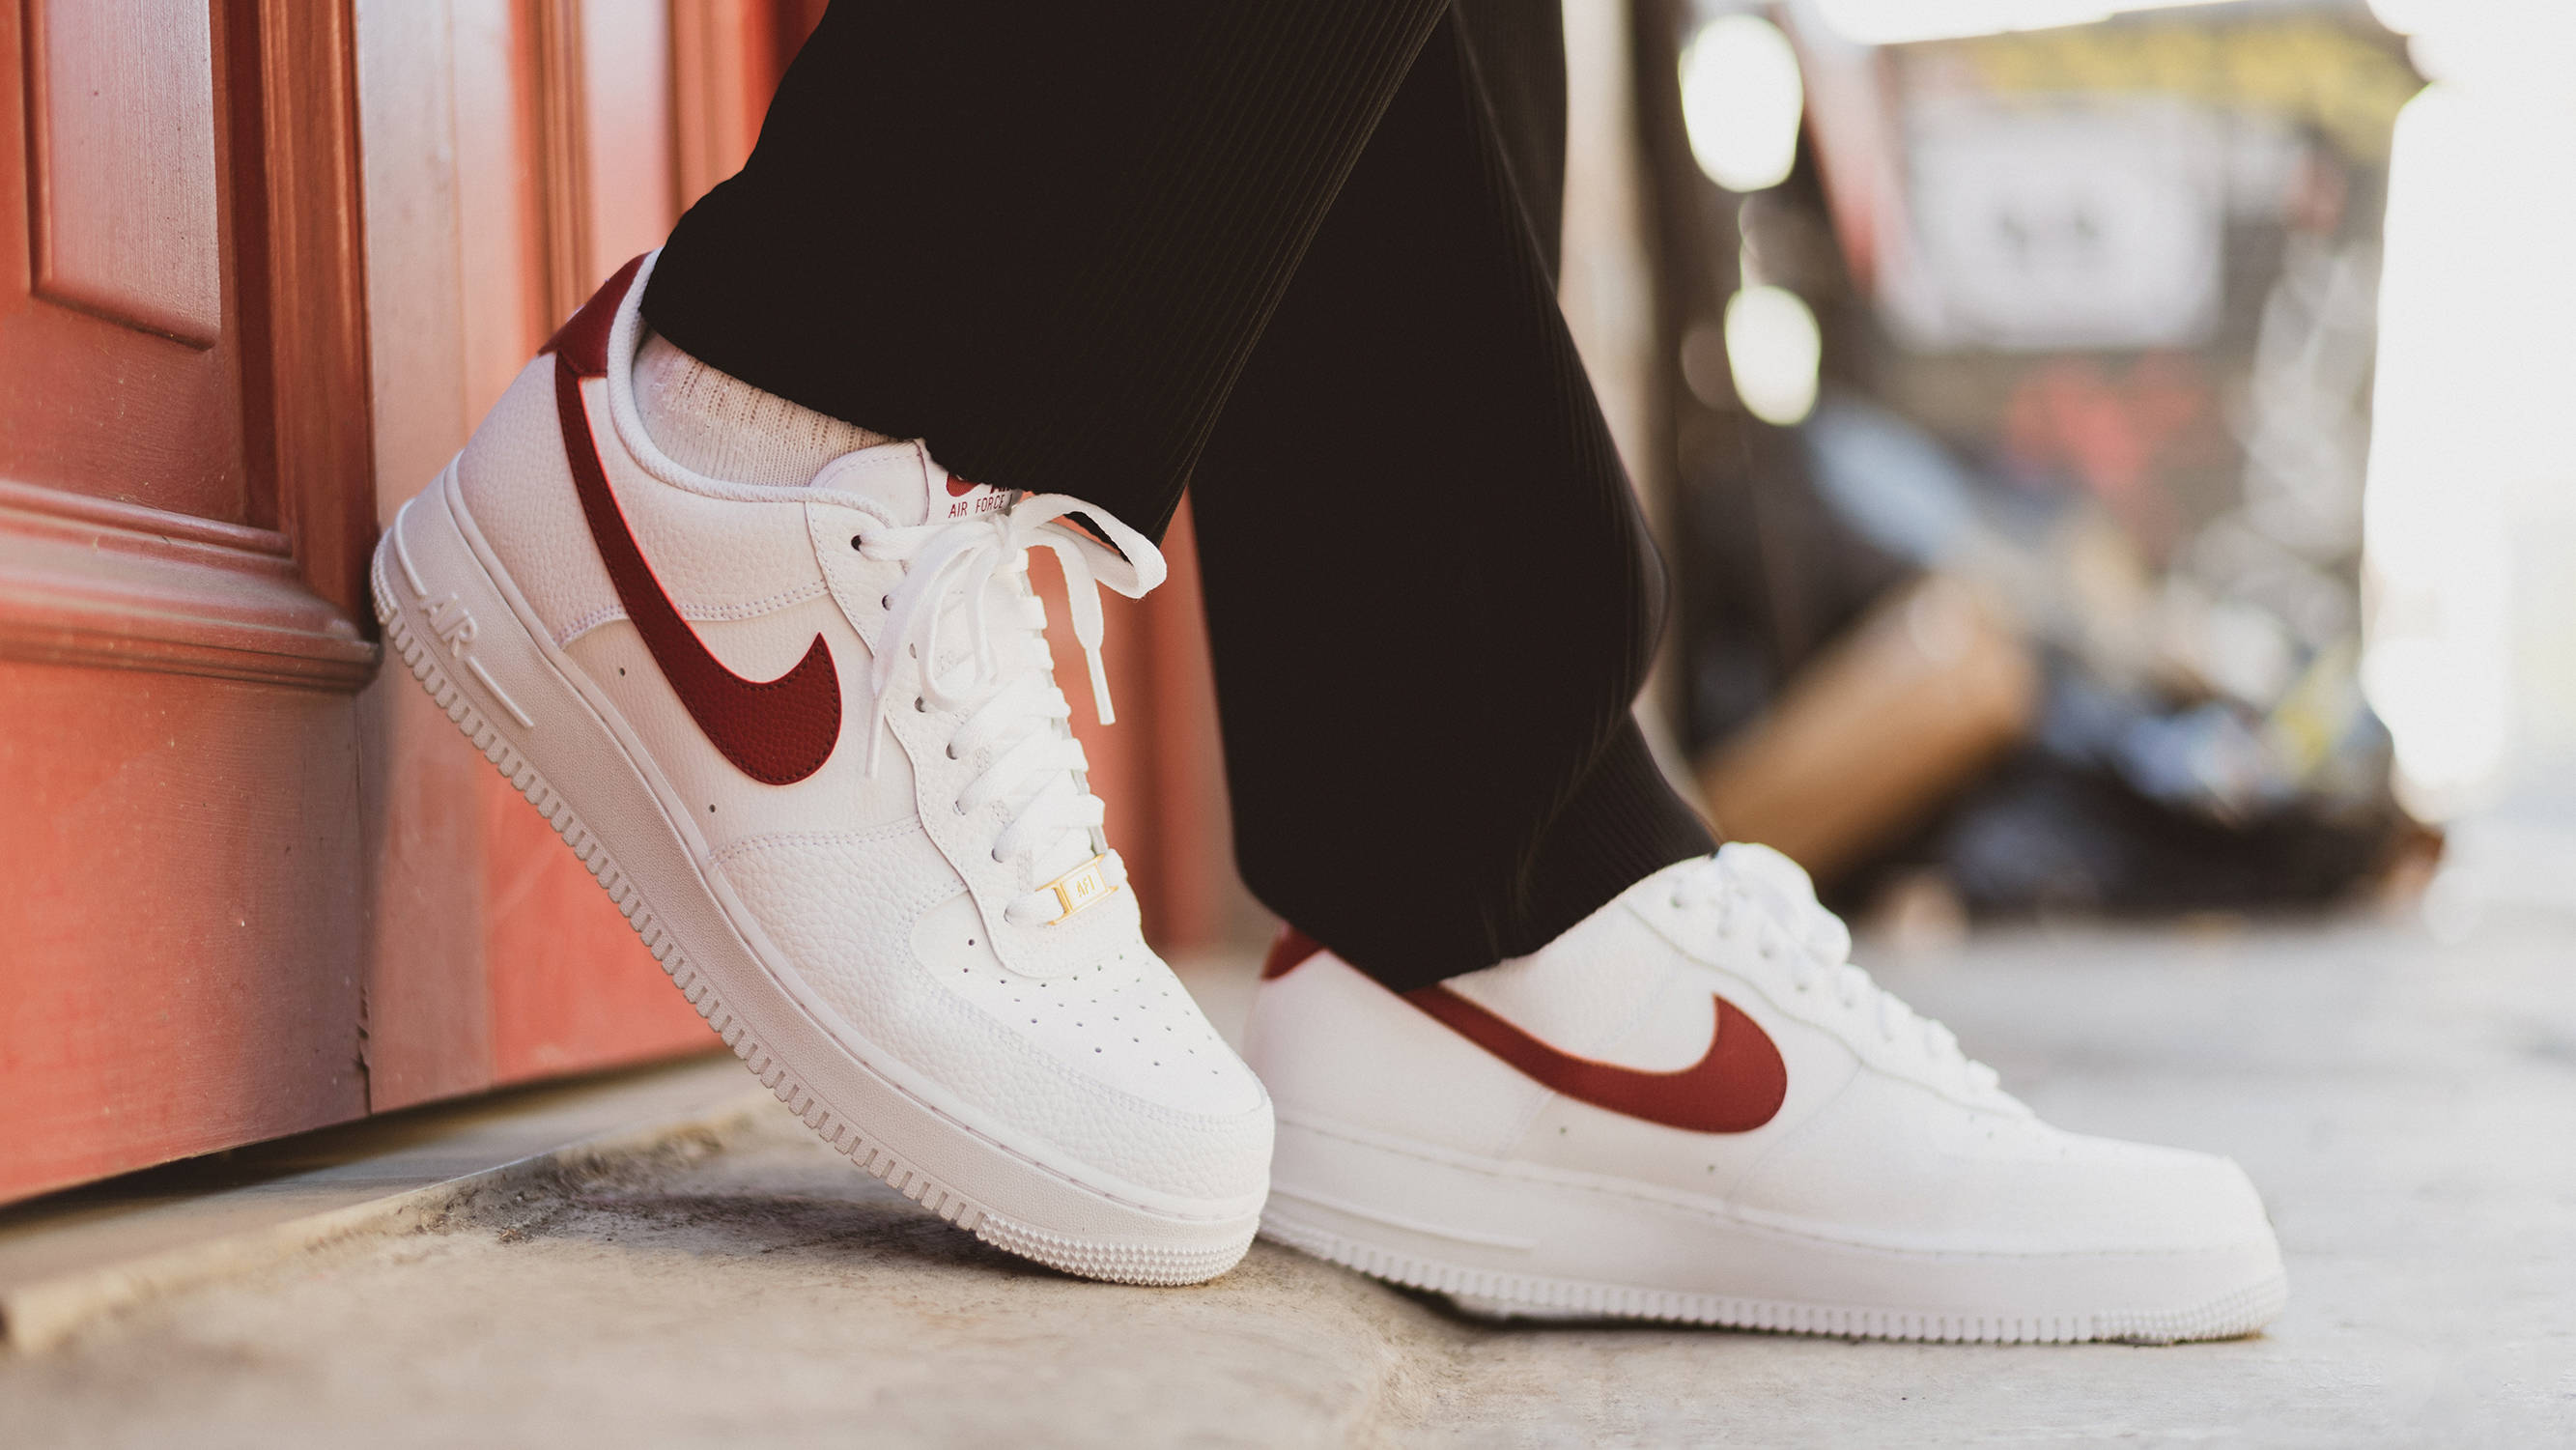 The Nike Air Force 1 Low 